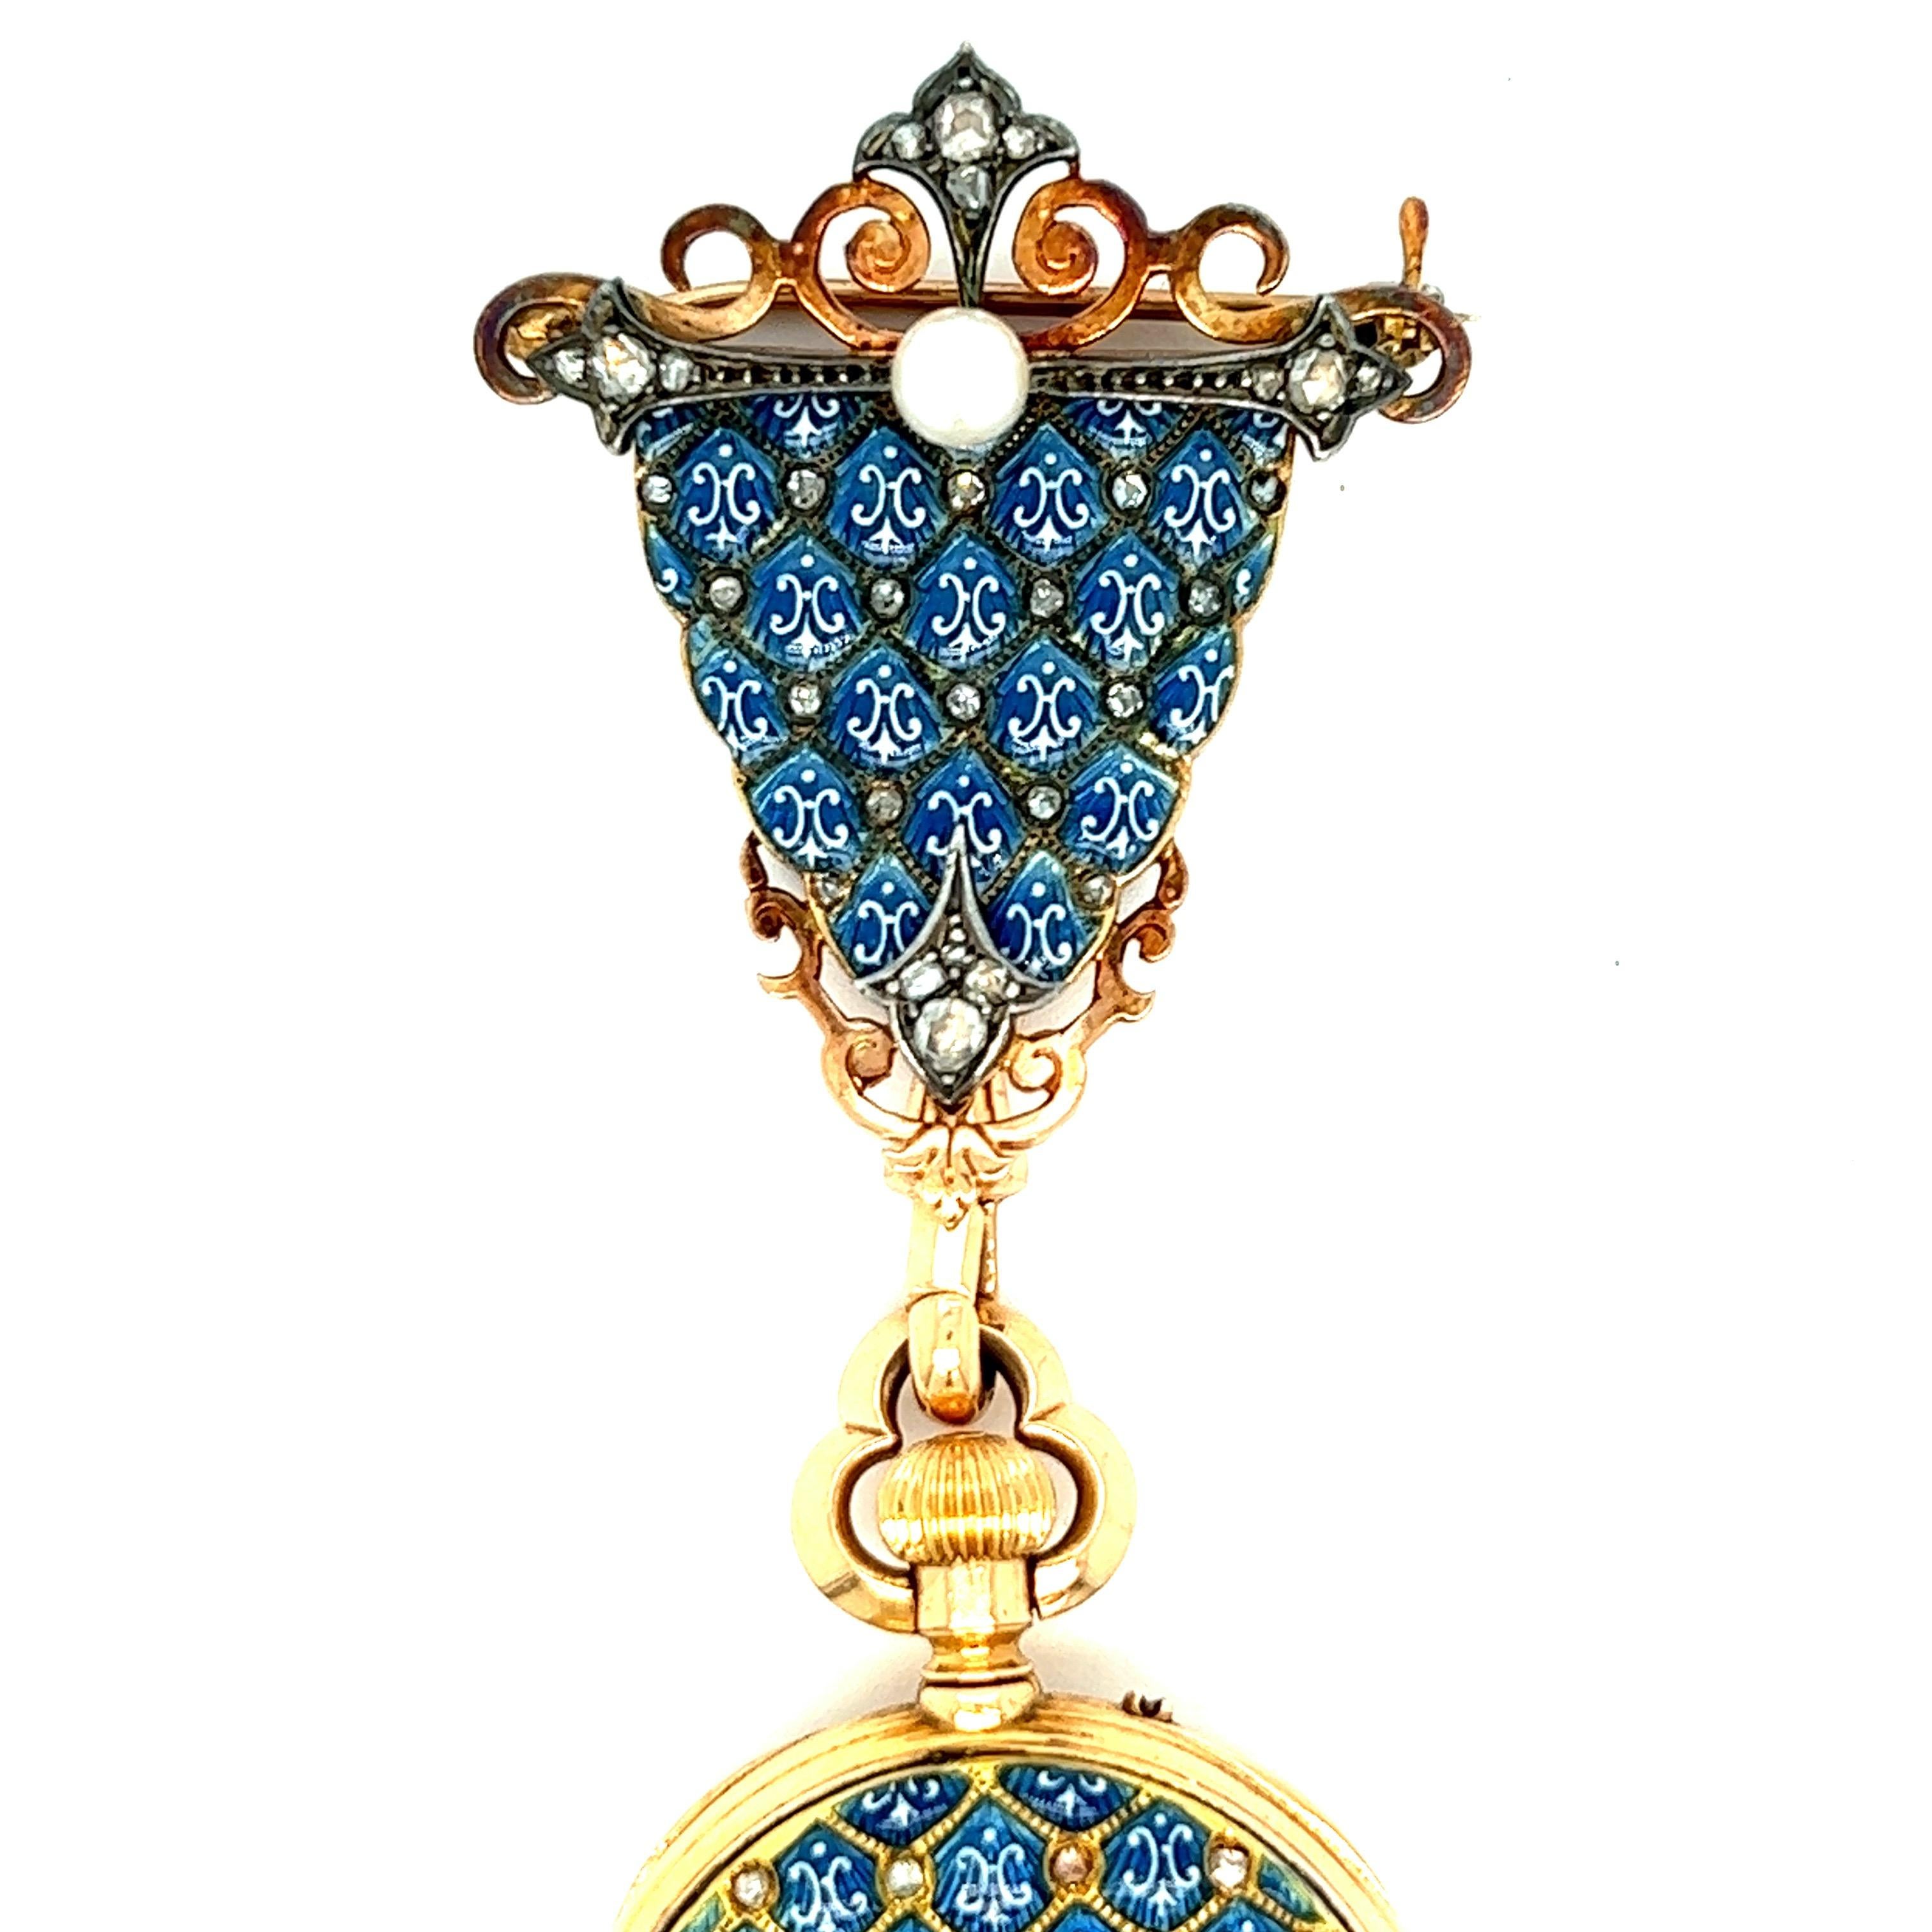 French blue enamel and diamond pendant watch, circa 1880s

Open face watch with one pearl and old mine cut rough diamonds, enamel dial with Roman numerals; marked 24388; inscribed 